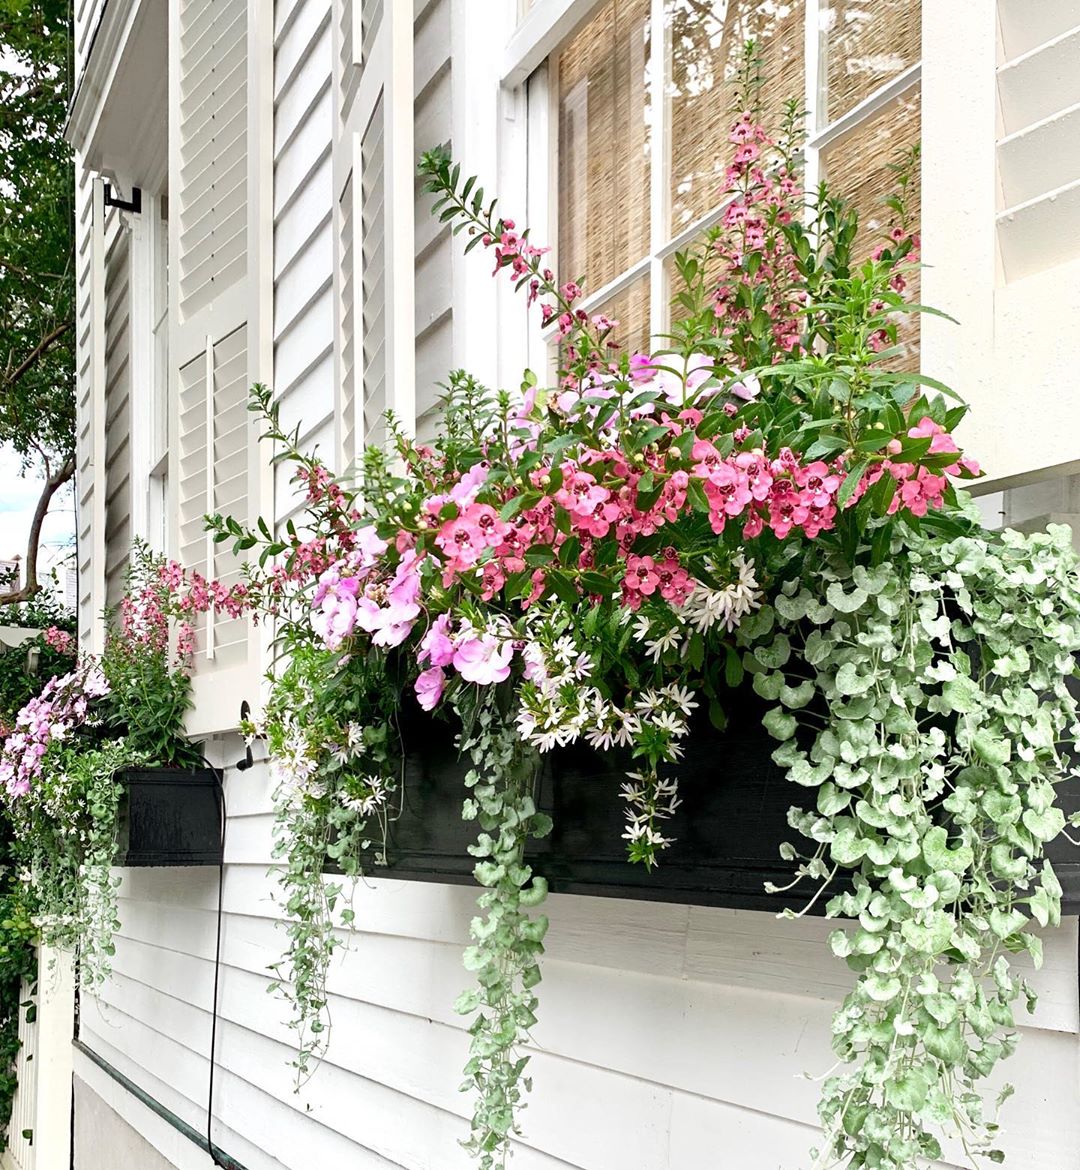 Black Window Boxes with Blooming Flowers. Photo by Instagram user @thecharlestonlens